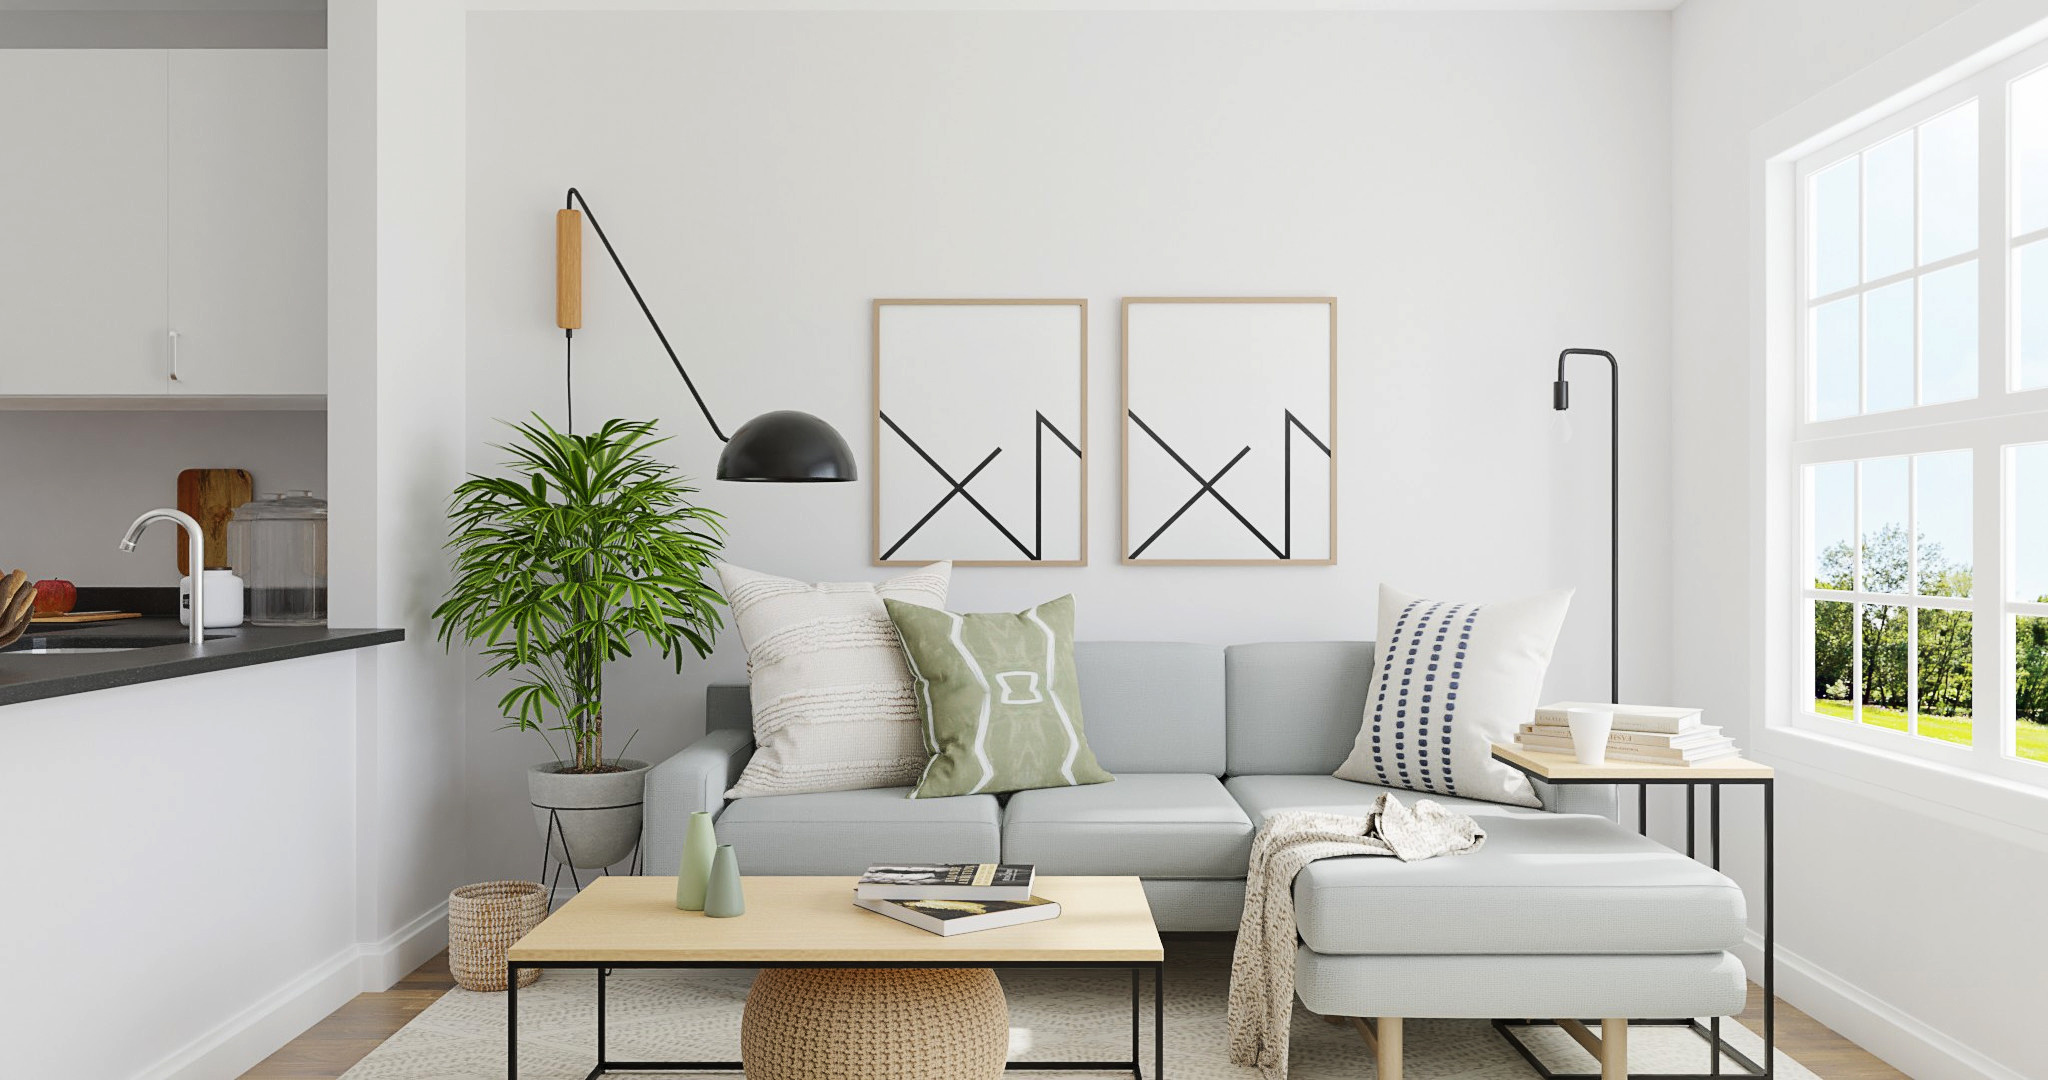 Modern Studio Apartment Decor: A Fresh And Stylish Take On Small Space Living